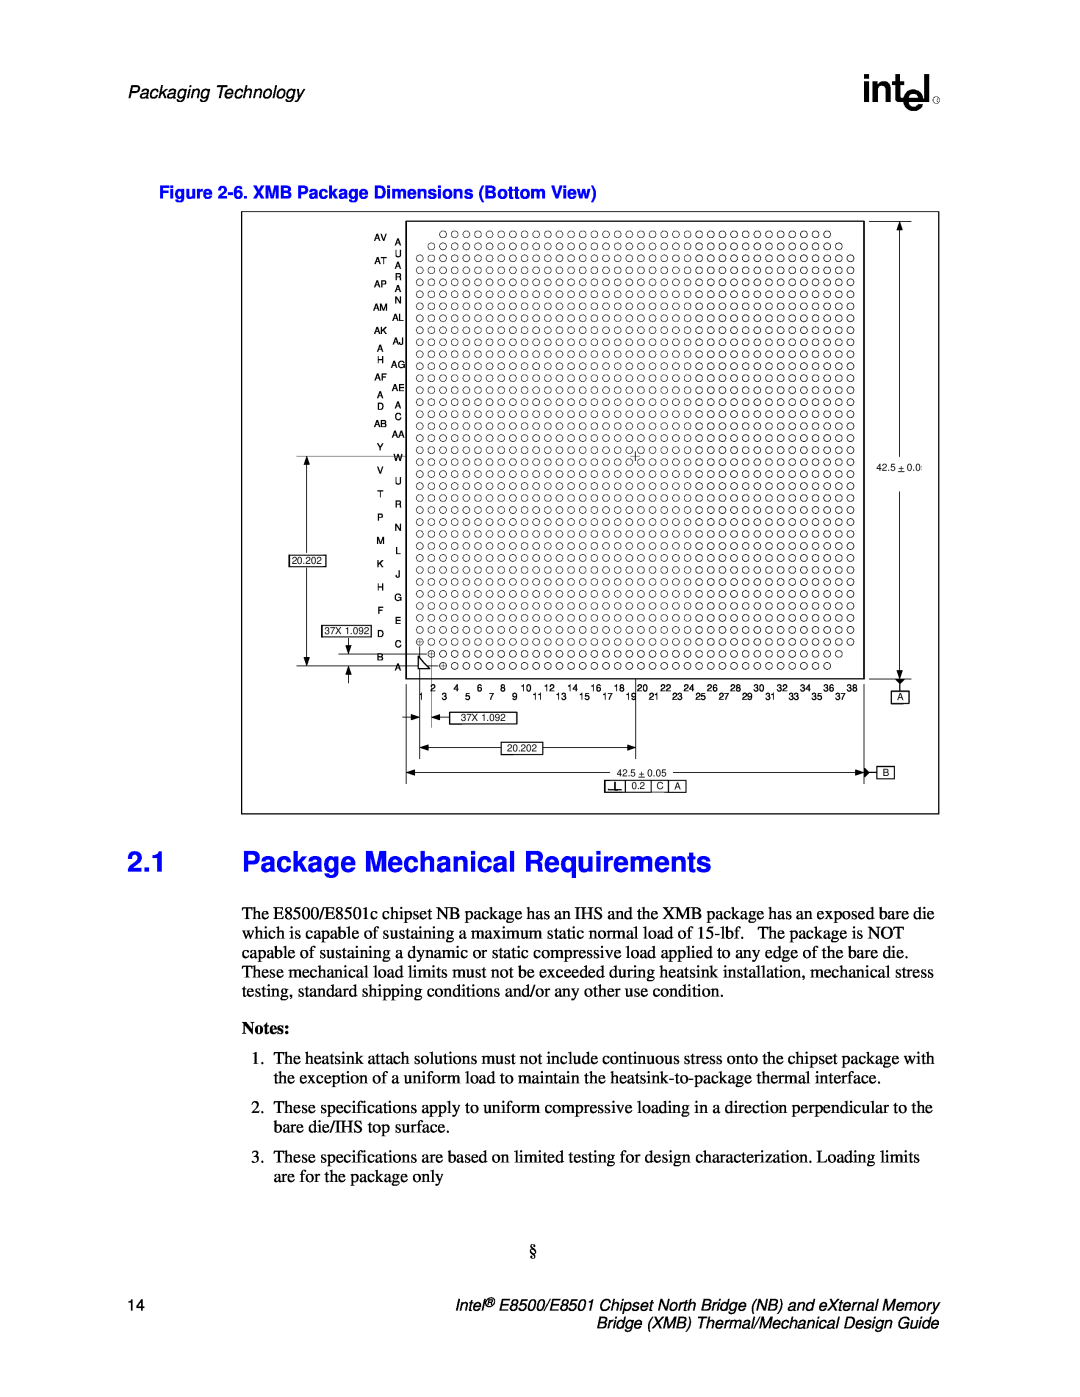 Intel E8501 manual 2.1Package Mechanical Requirements, Packaging Technology, 6.XMB Package Dimensions Bottom View 